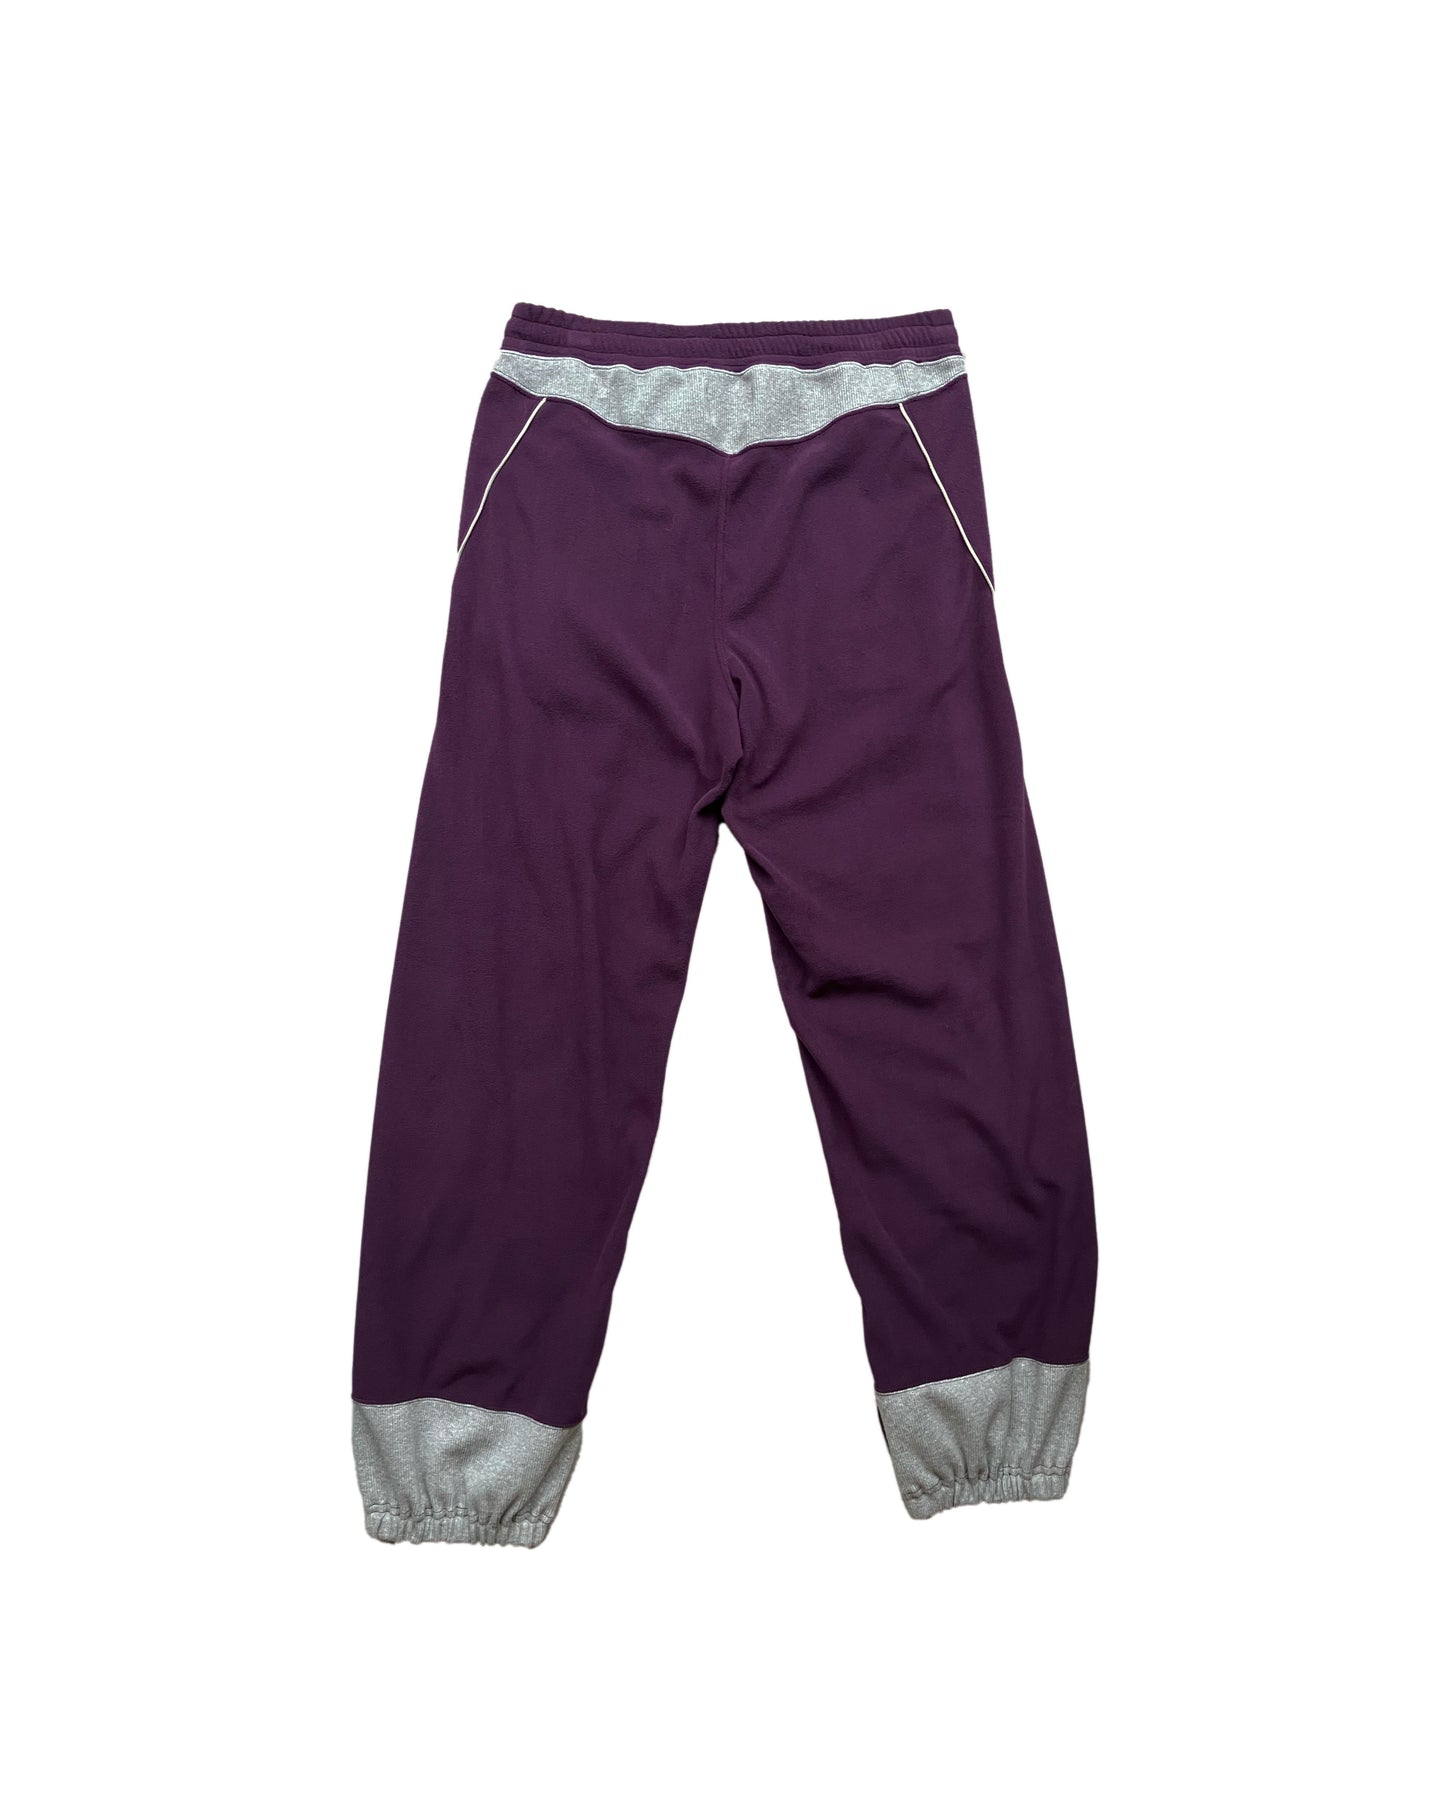 Call - CL_AW23_PT_05 / TRACK TROUSERS - Purple